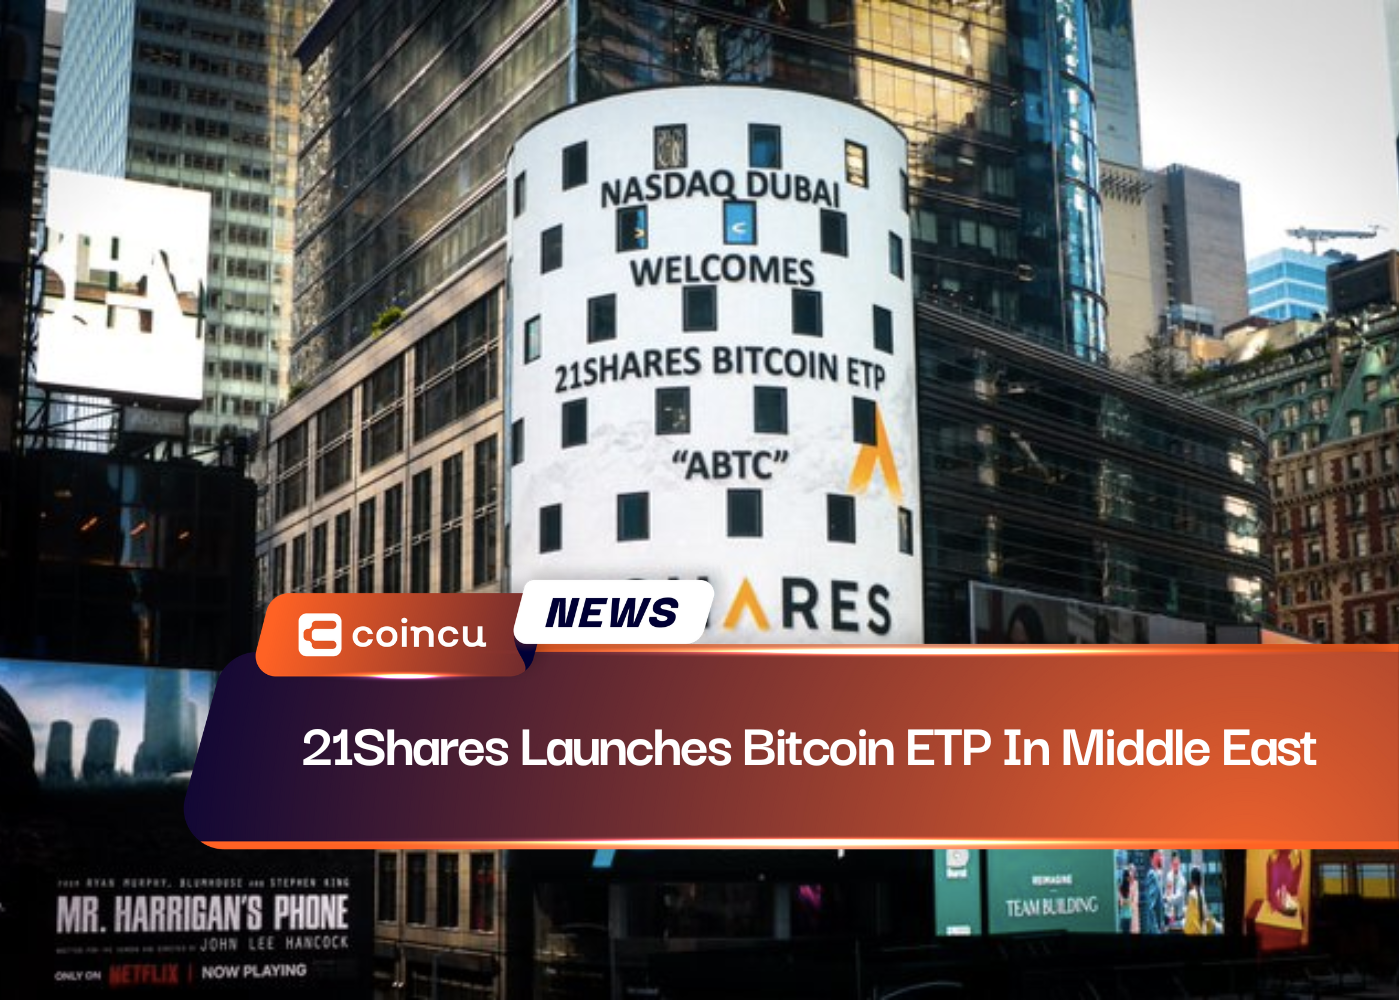 21Shares Launches Bitcoin ETP In Middle East